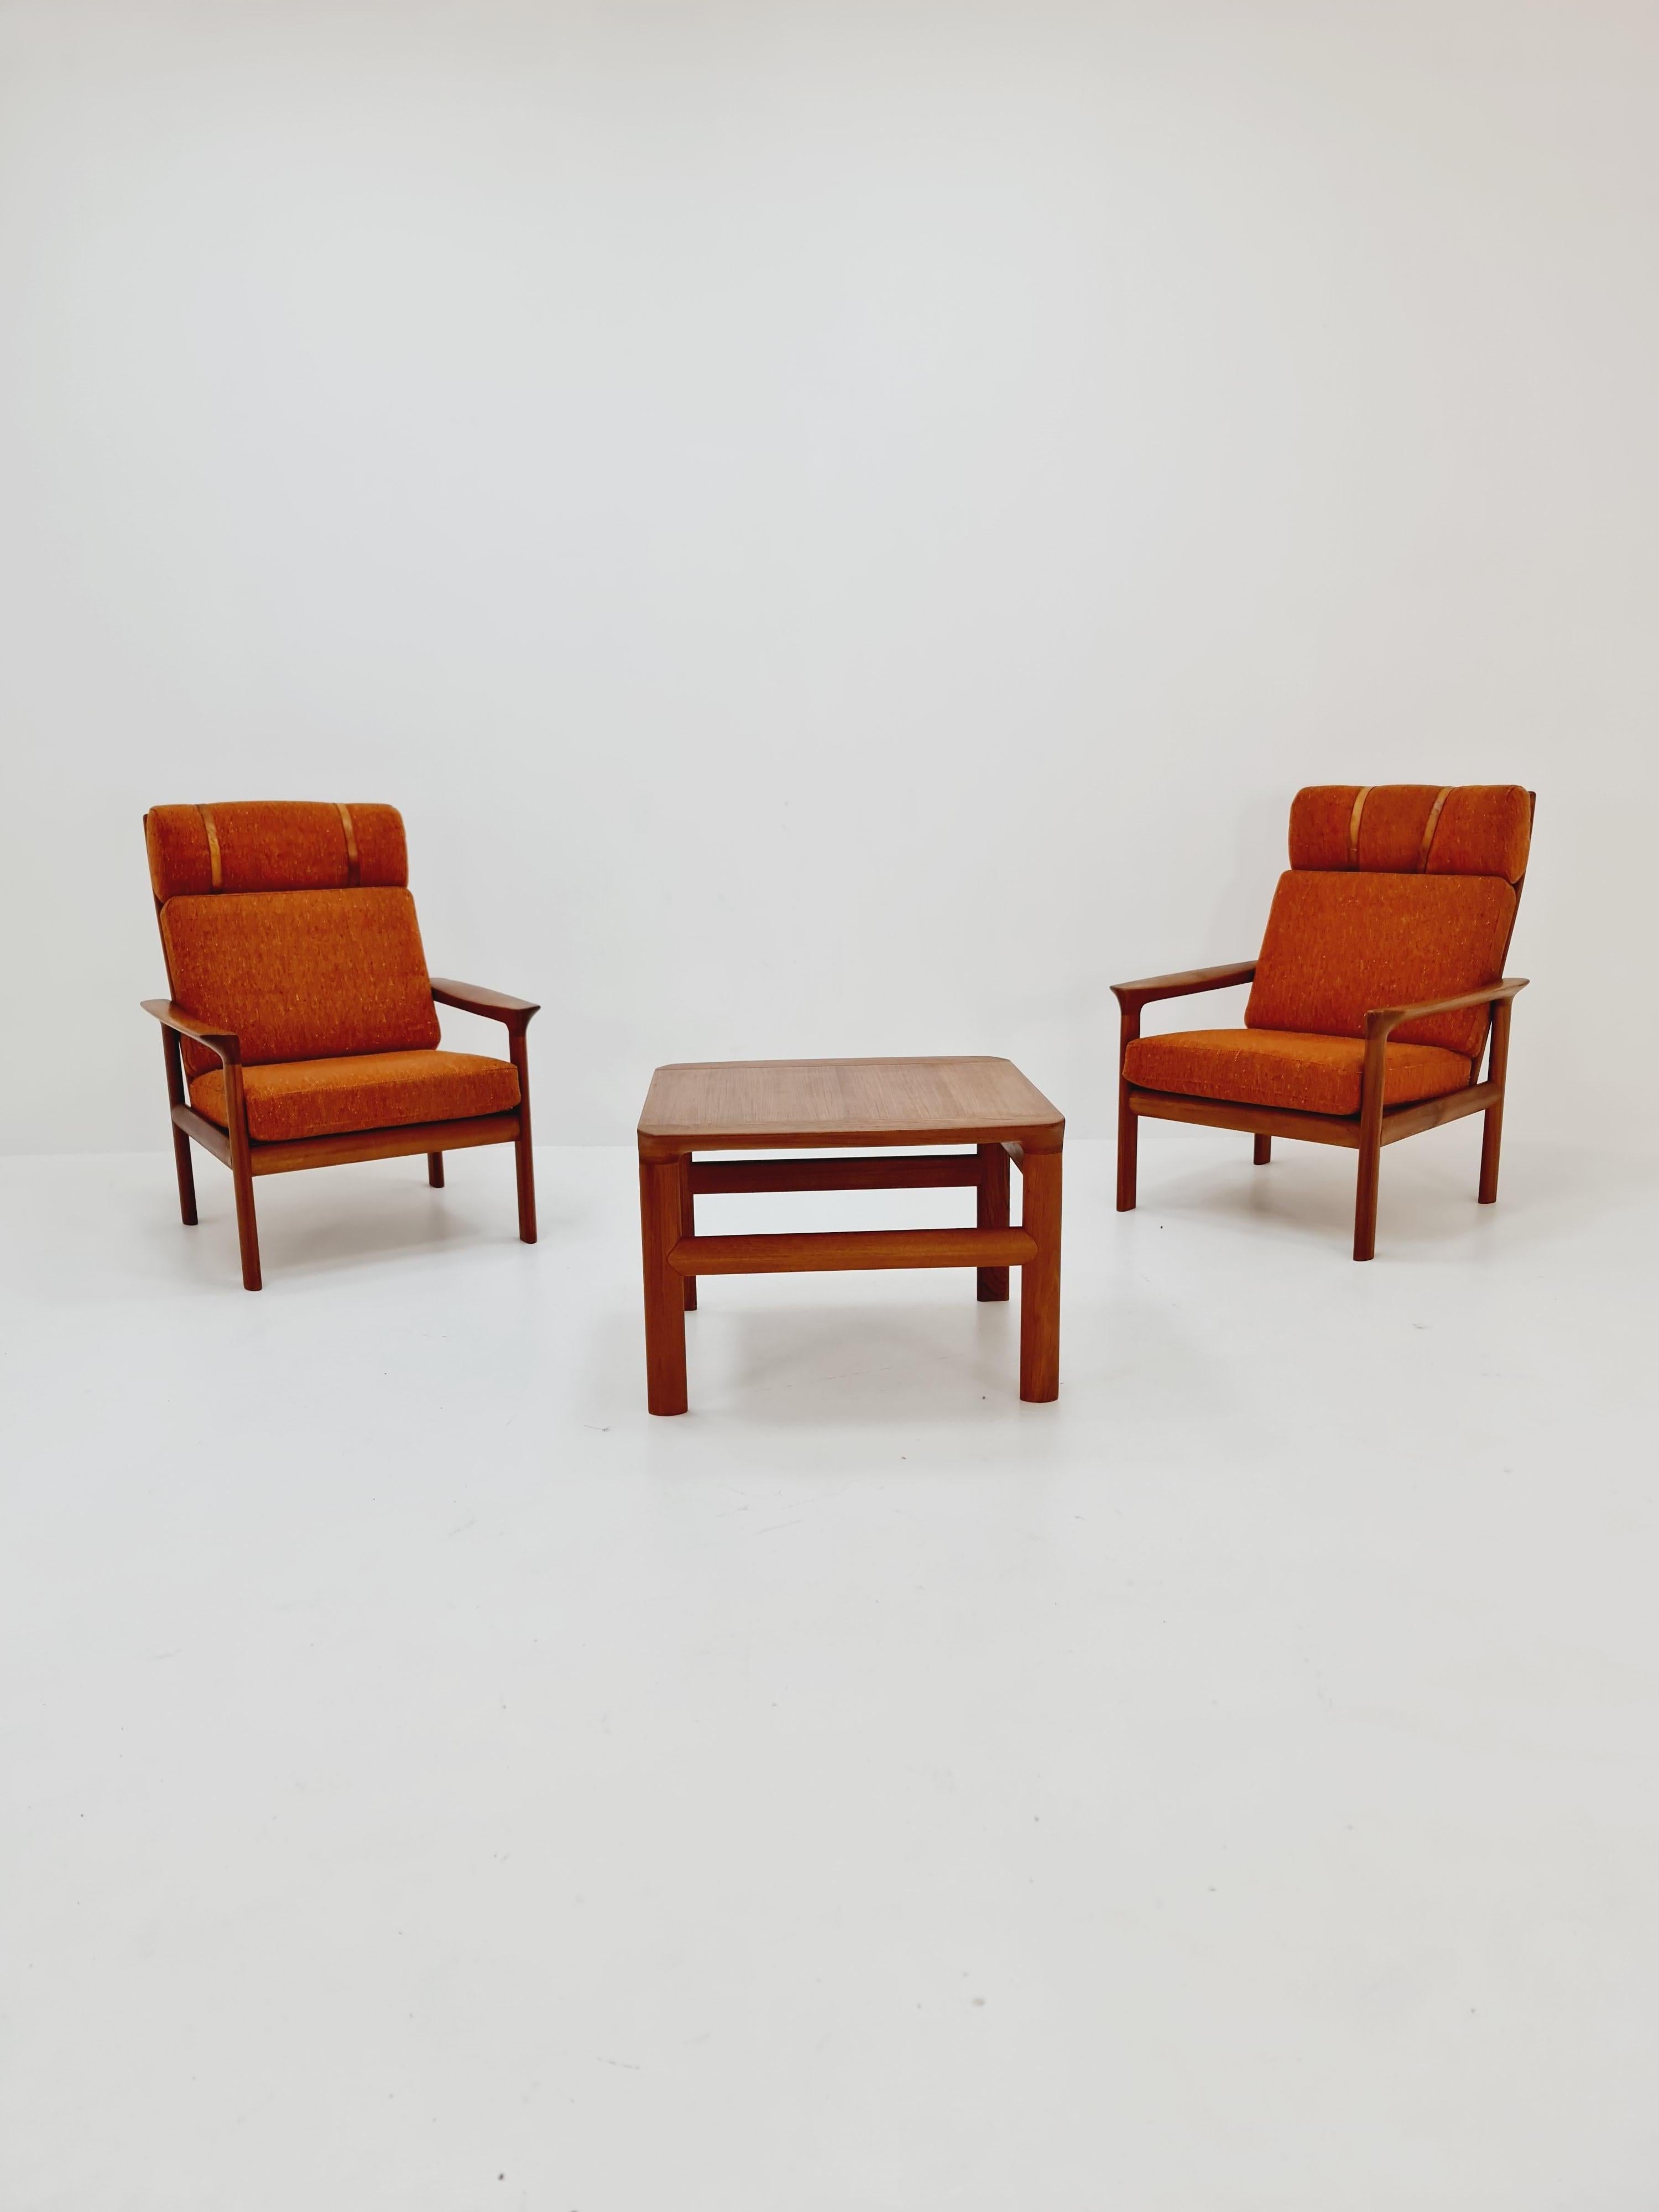 Mid century teak easy lounge high back chairs by Sven Ellekaer for Komfort , Set of 2, 1960s

It is in great condition. However, as with all the vintage items some minor wear marks should be expected. The upholstery is in good condition and are